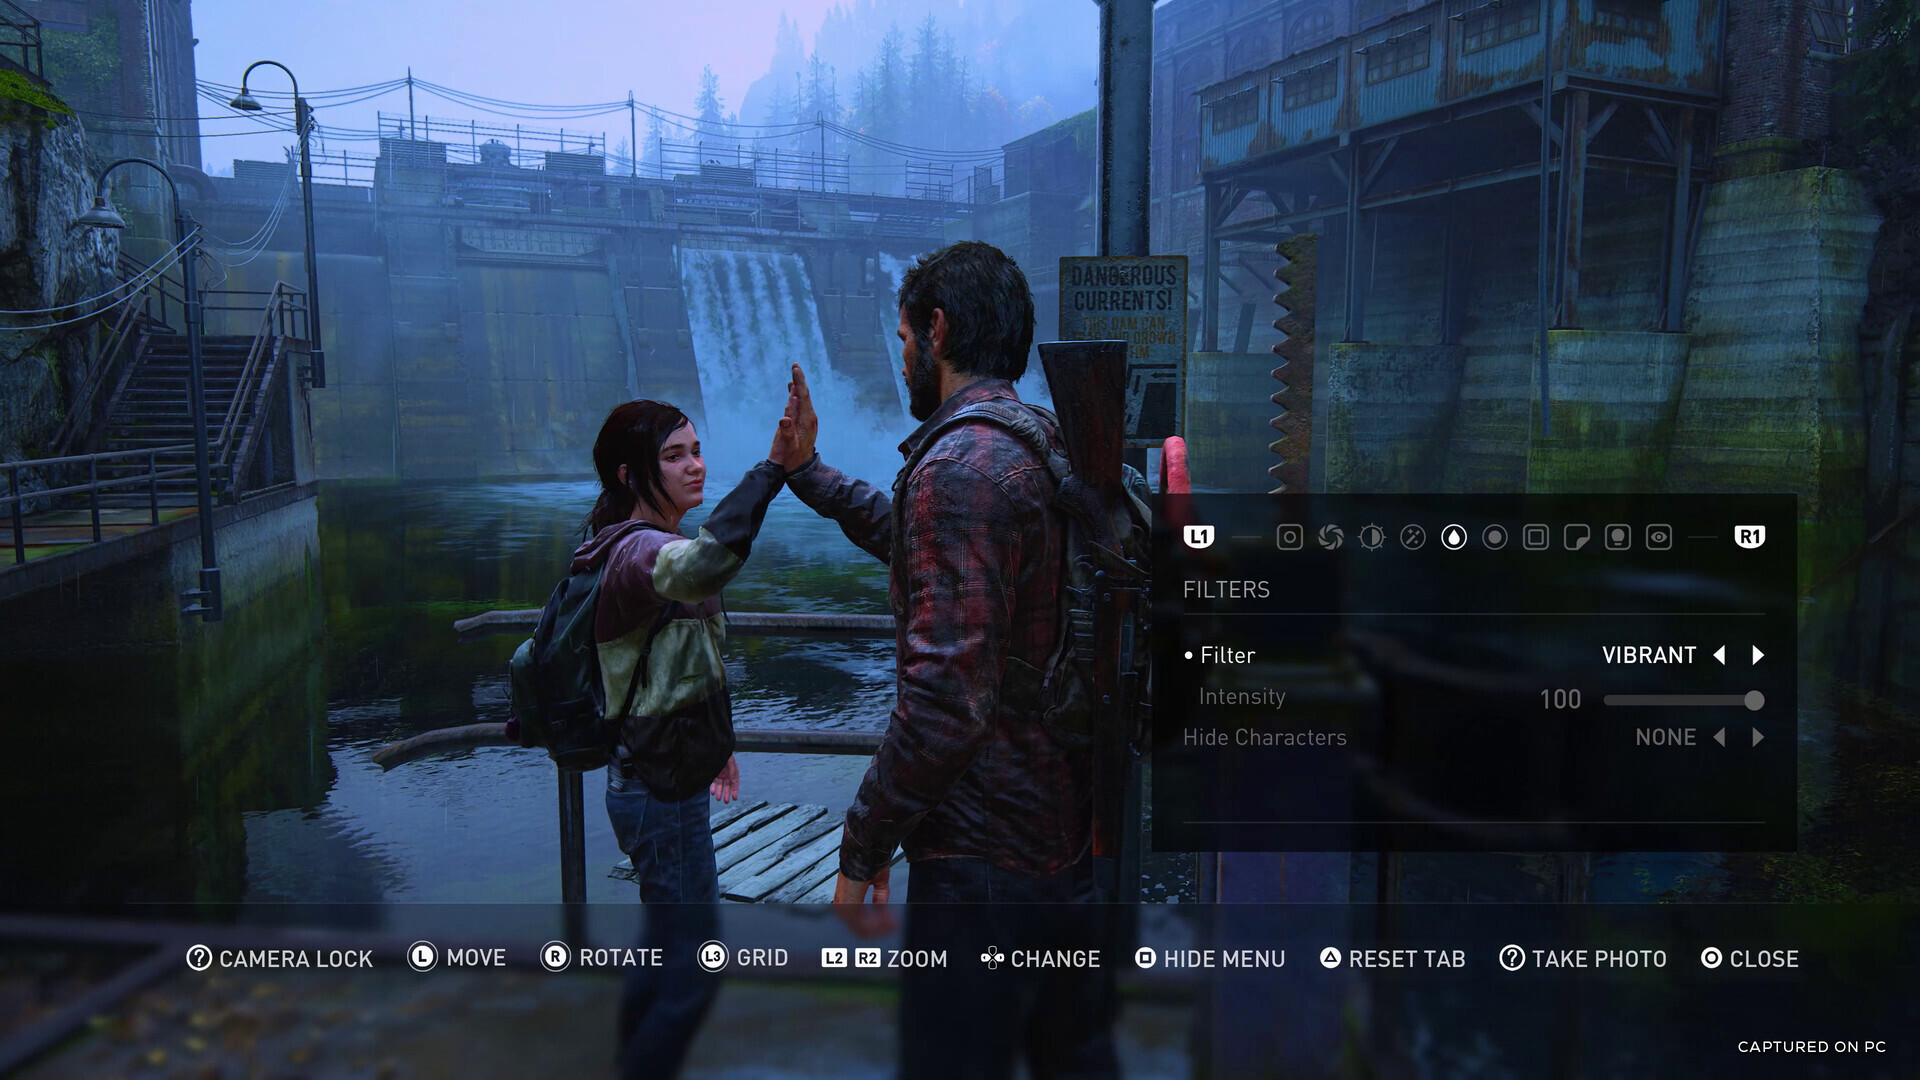 Win a The Last of Us Part I Steam Key from Ghost Motley